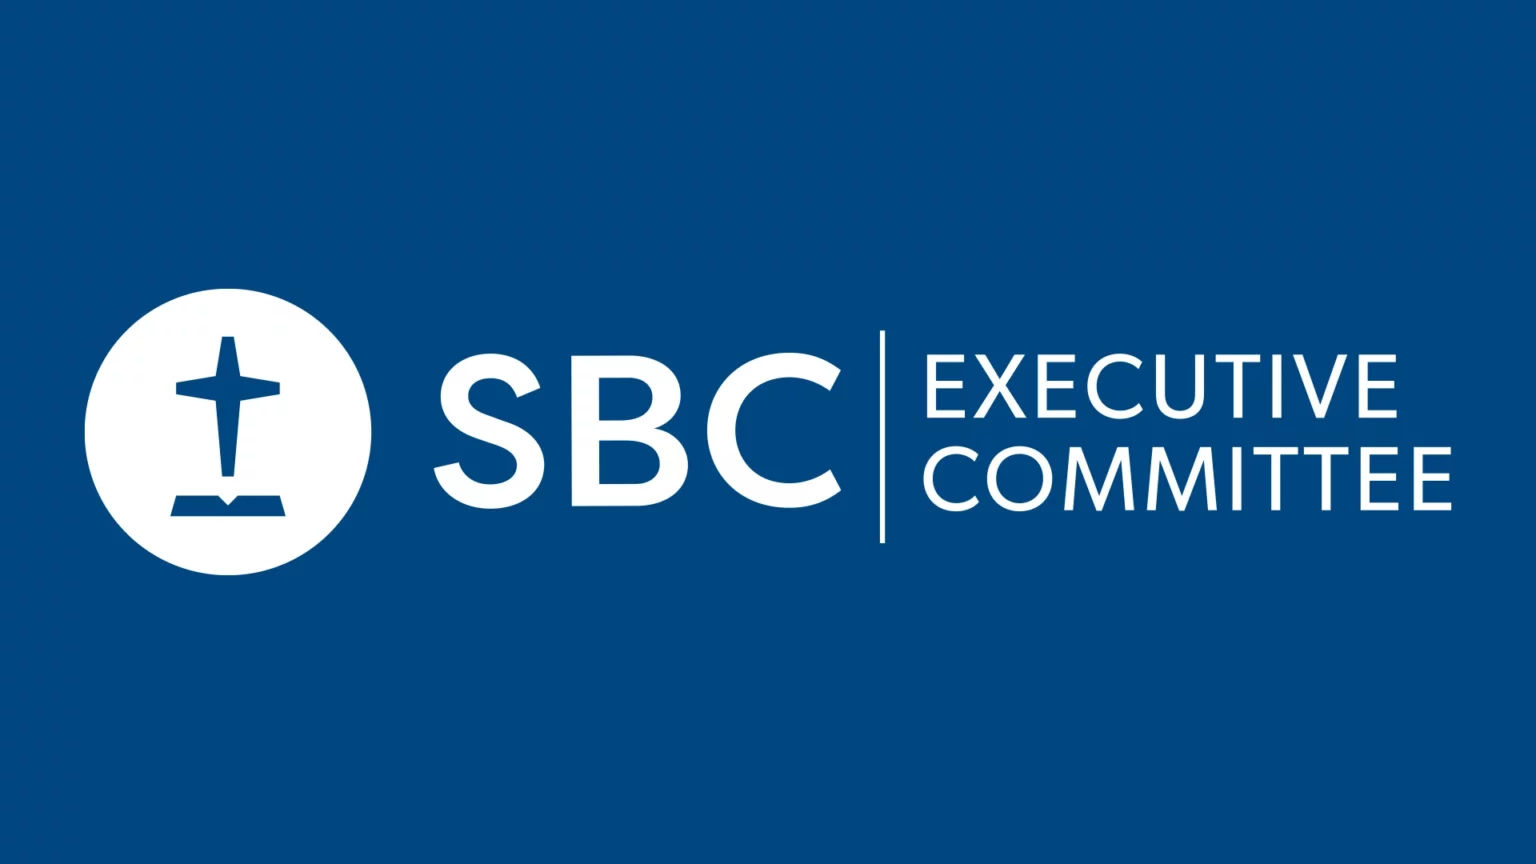 SBC Executive Committee Approves 2023 Annual Meeting Move From Charlotte To New Orleans, Provides Financial Update